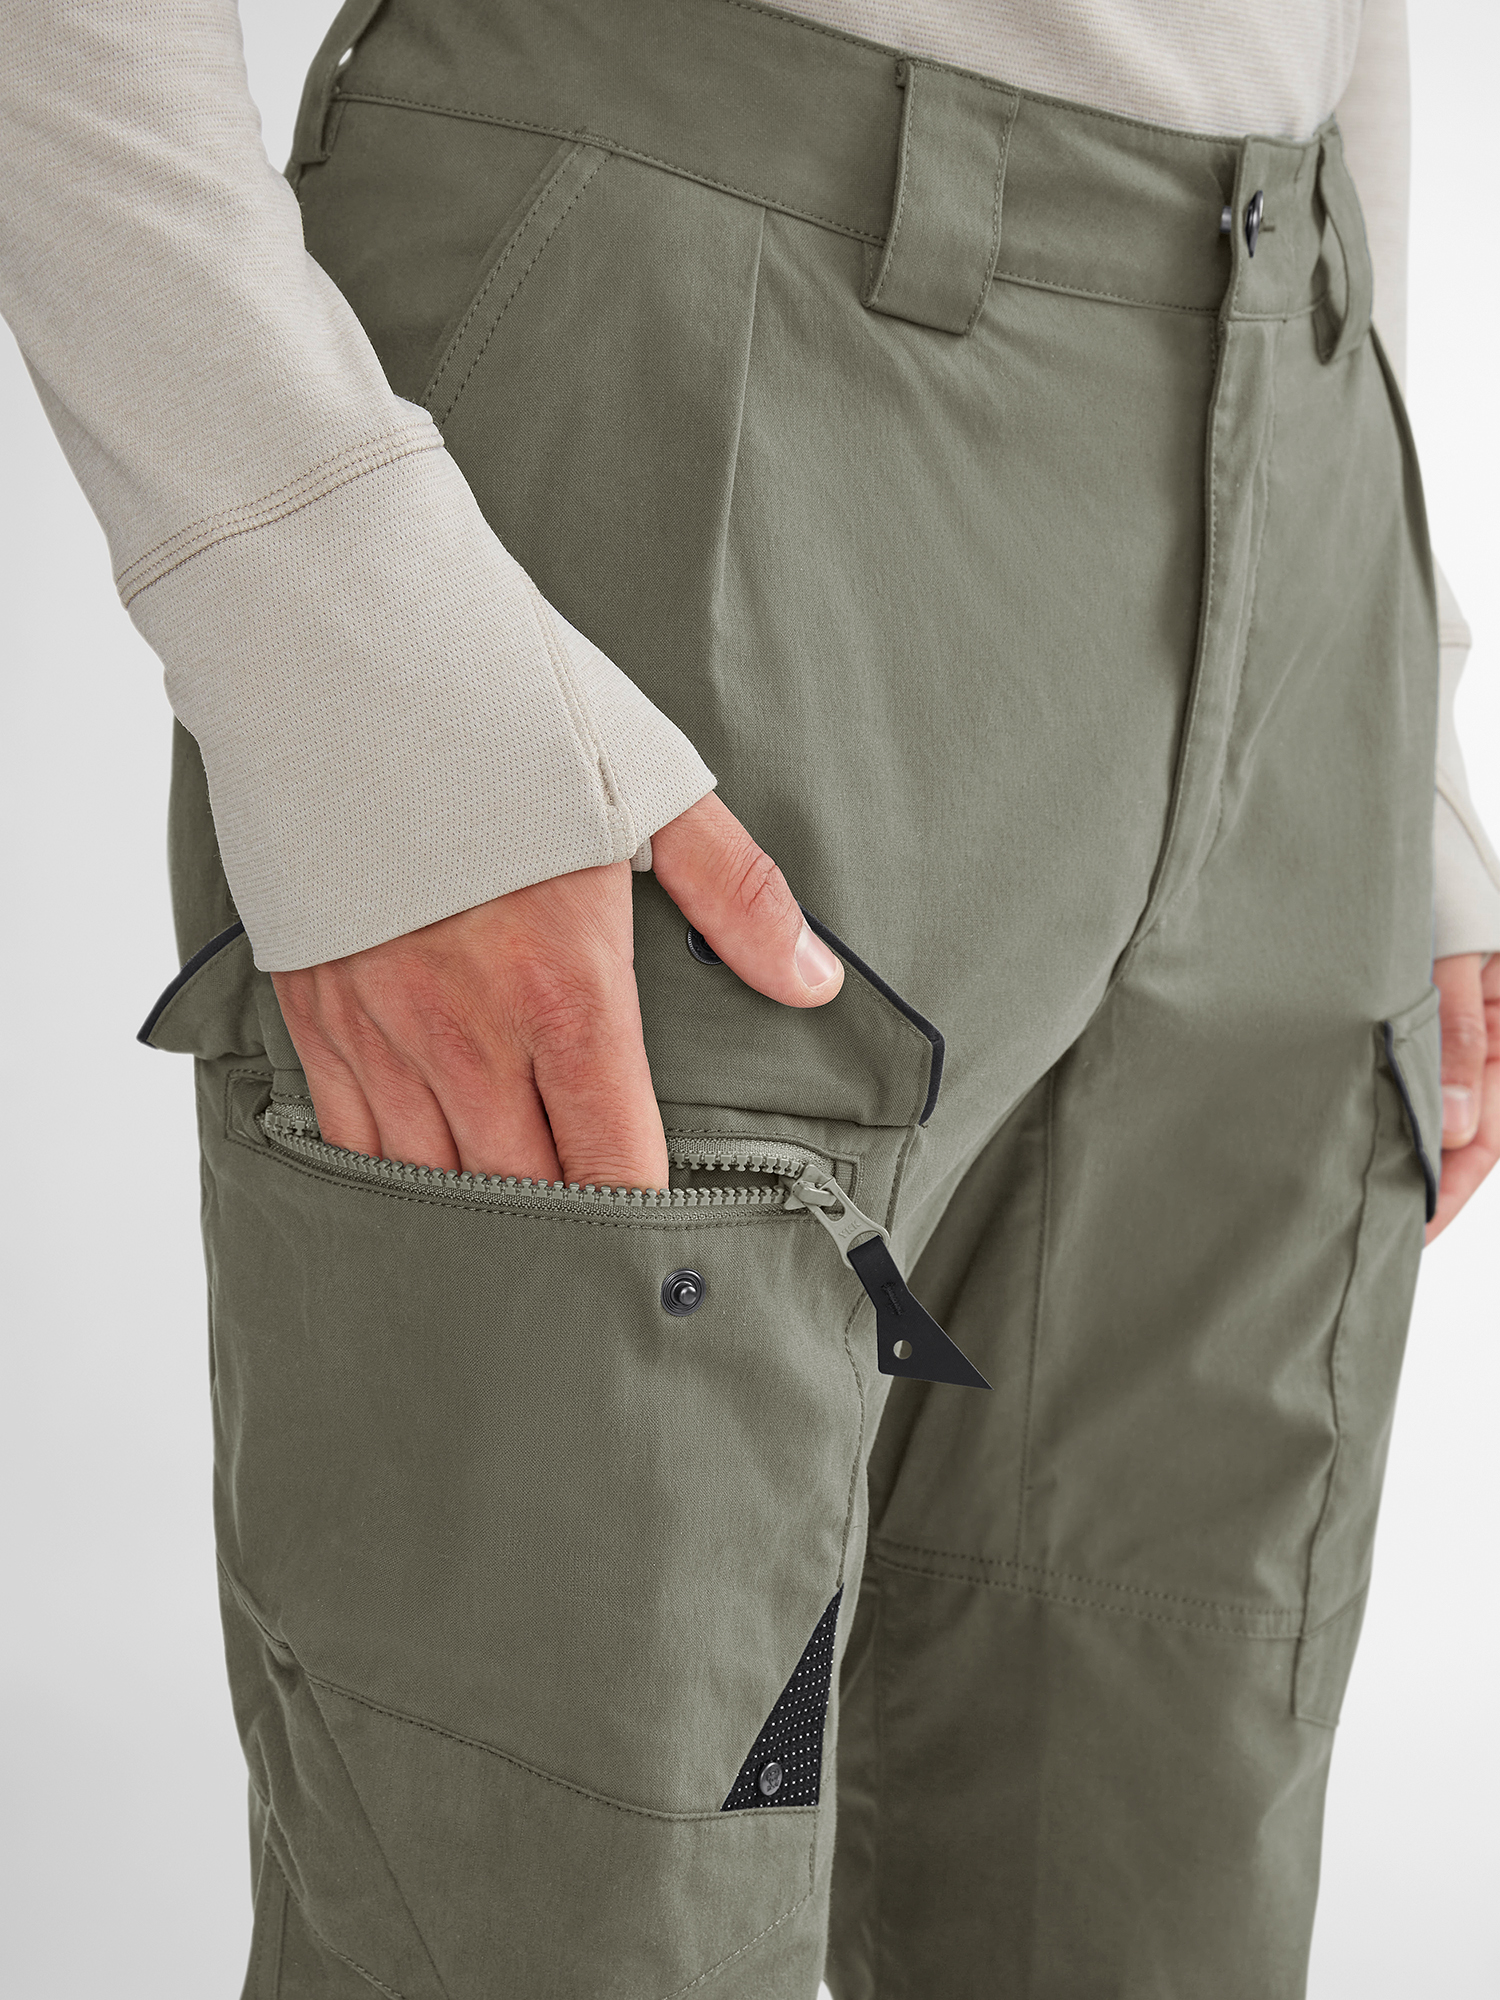 15588M11 - Grimner Pant M's - Dusty Green-Dusty Green